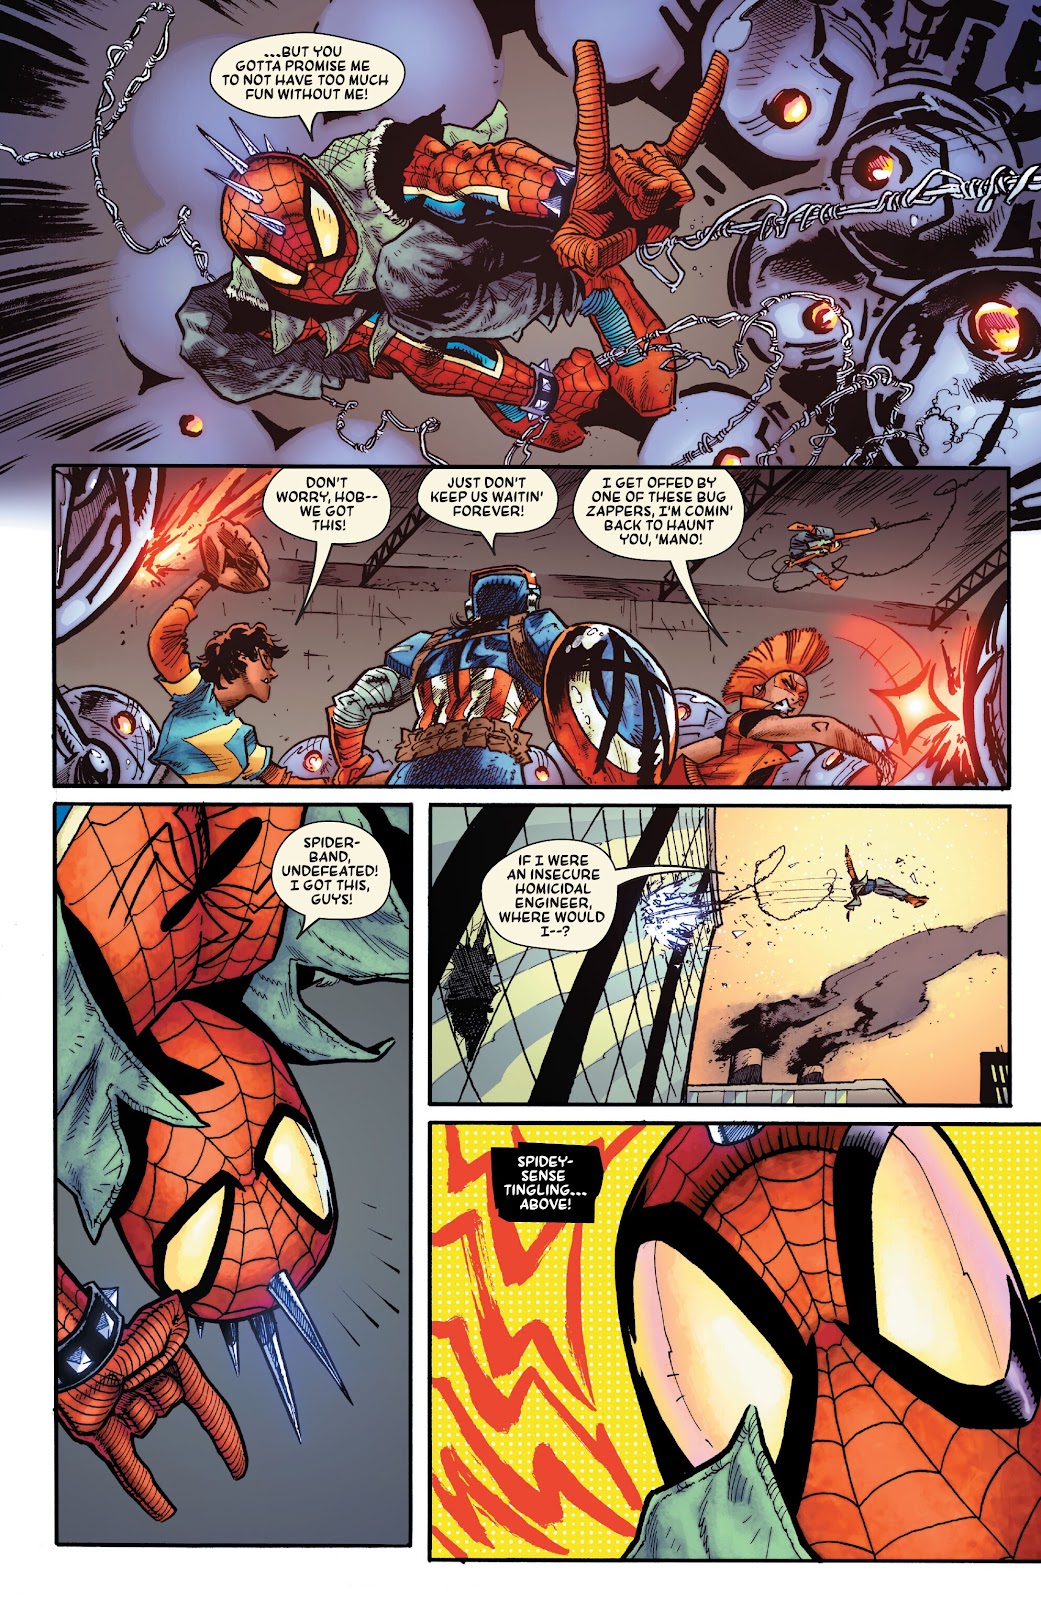 Spider-Punk: Arms Race issue 3 - Page 14